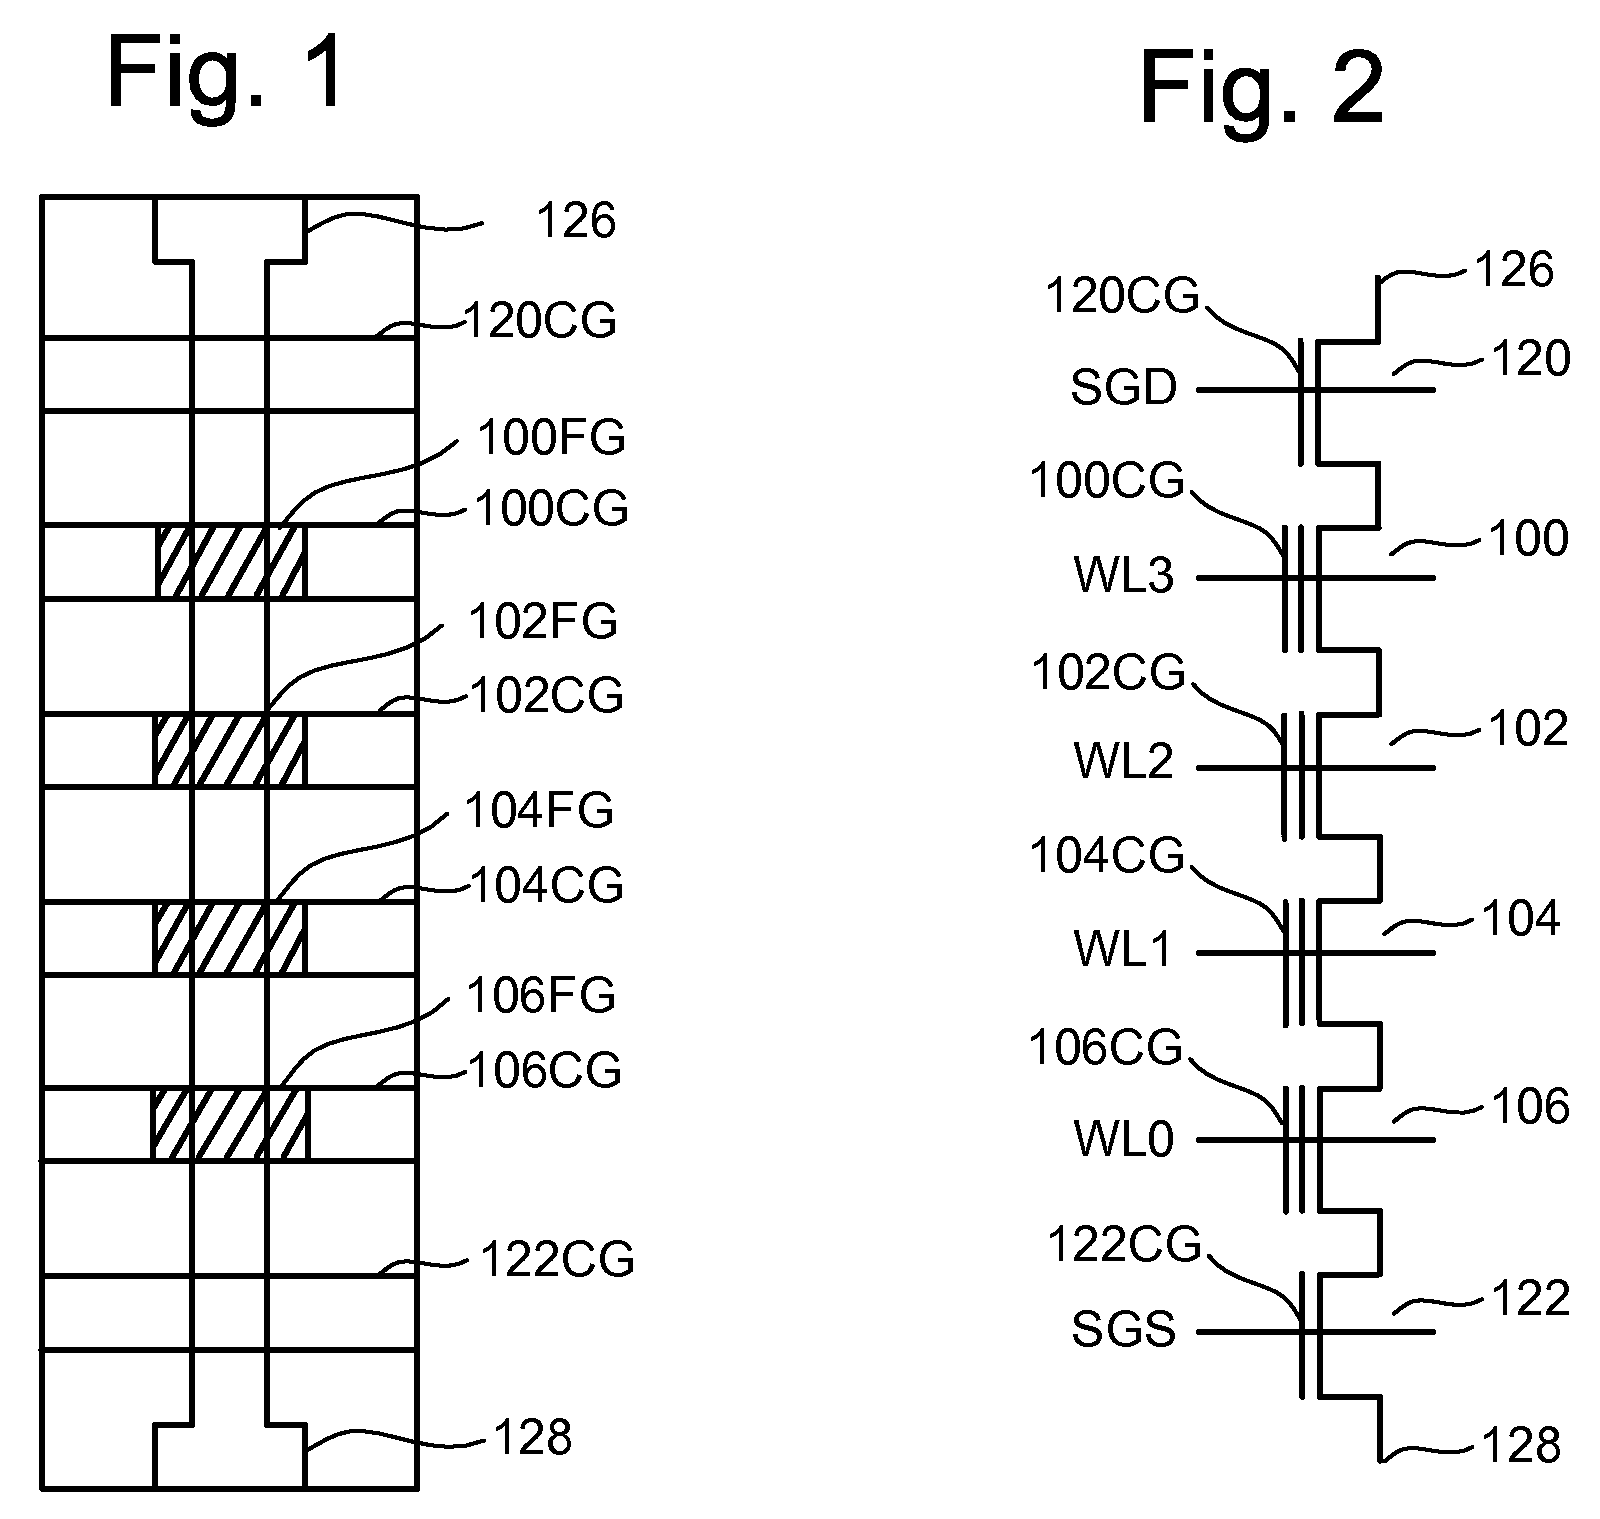 Apparatus with segmented bitscan for verification of programming